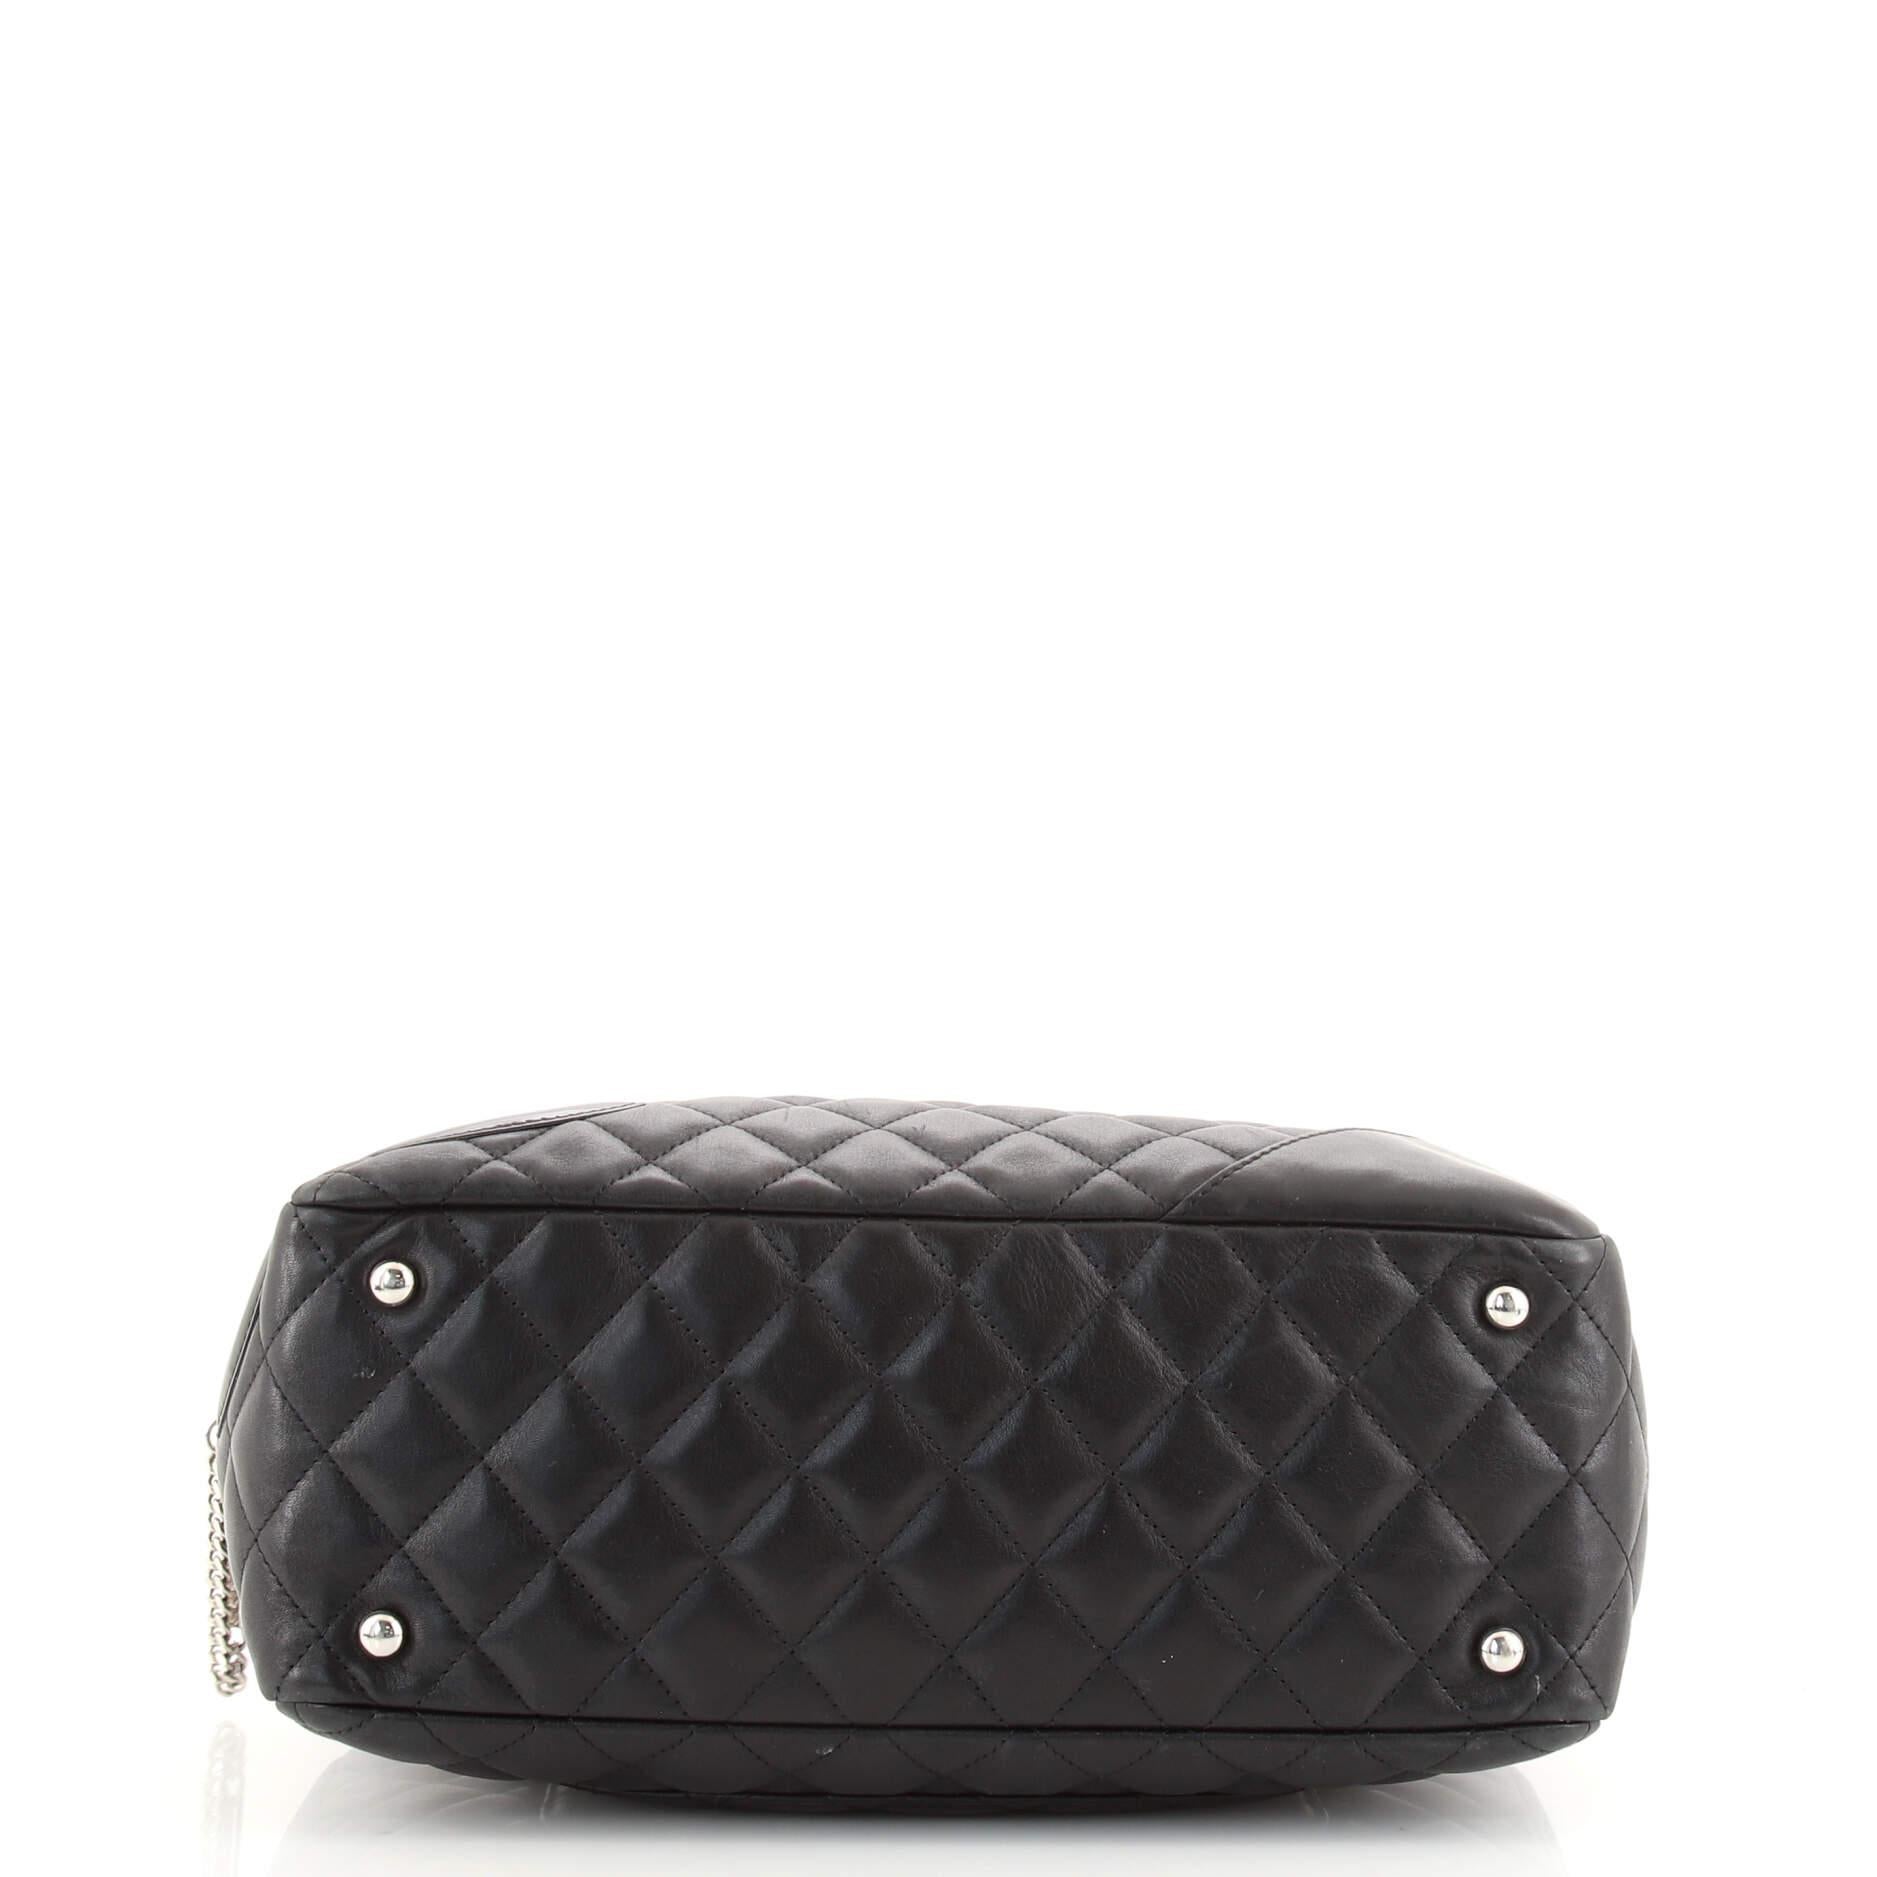 Women's or Men's Chanel Cambon Bowler Bag Quilted Leather Medium